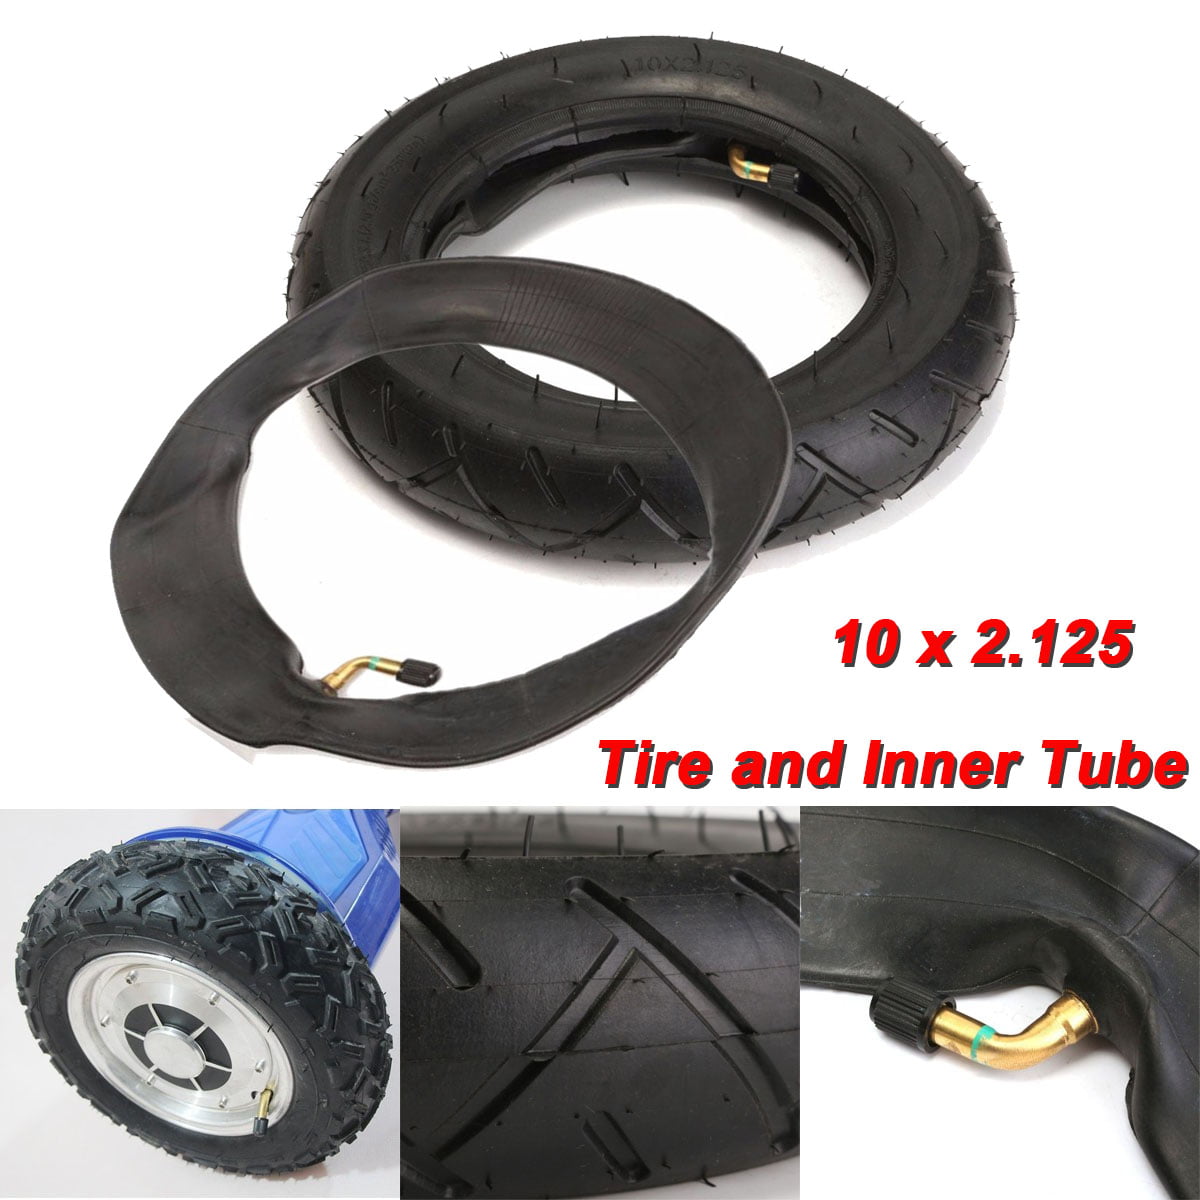 Tube for Smart Self Balancing 2-wheel Electric Scooter 10 Inch Unicycle RuTu Tyre 10 x 2.125 Tire 10 